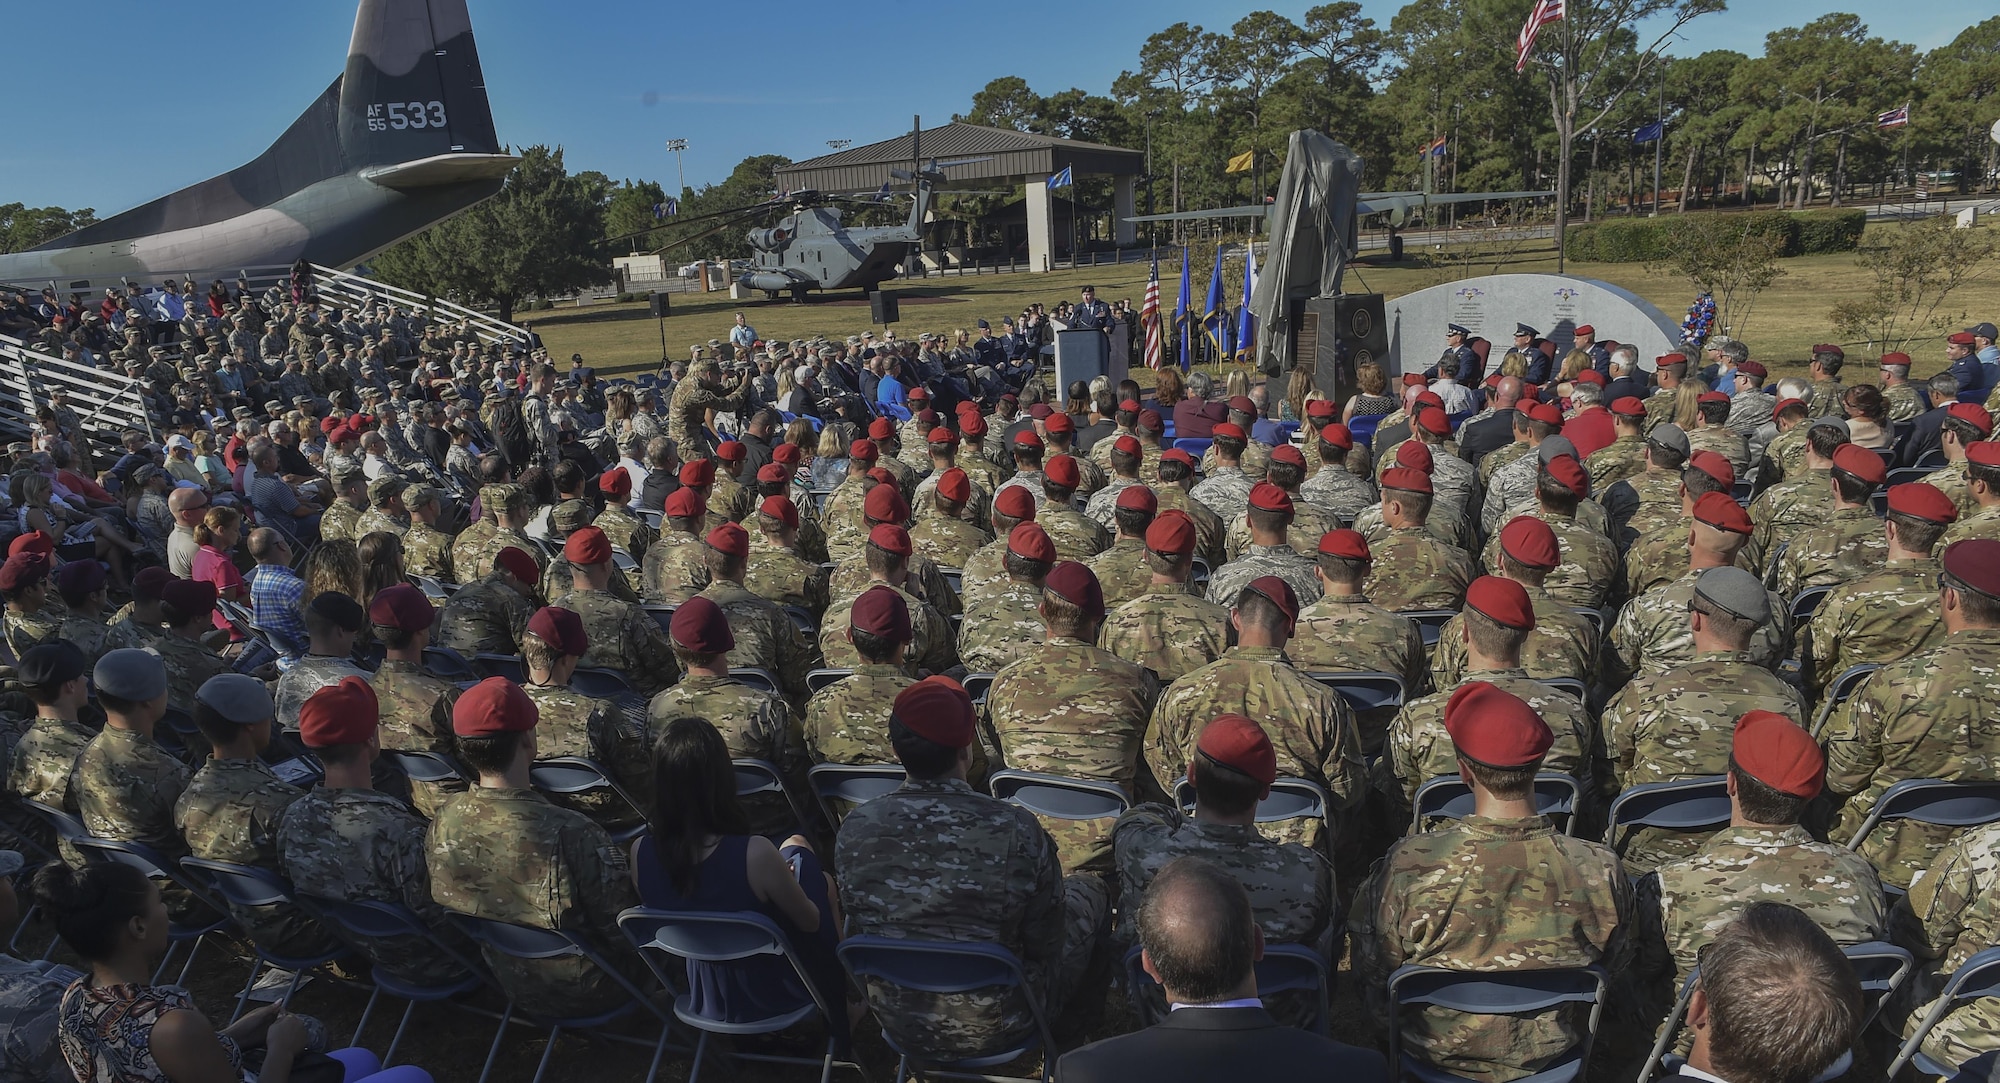 More than 800 Airmen and families attended the Special Tactics Memorial dedication ceremony at Hurlburt Field, Fla., Oct. 20, 2016. Special Tactics, the Air Force’s ground special operations force, has been engaged in every major conflict since 9/11, continuously deployed for more than 5,000 days to more than 73 locations. (U.S. Air Force photo by Senior Airman Ryan Conroy) 